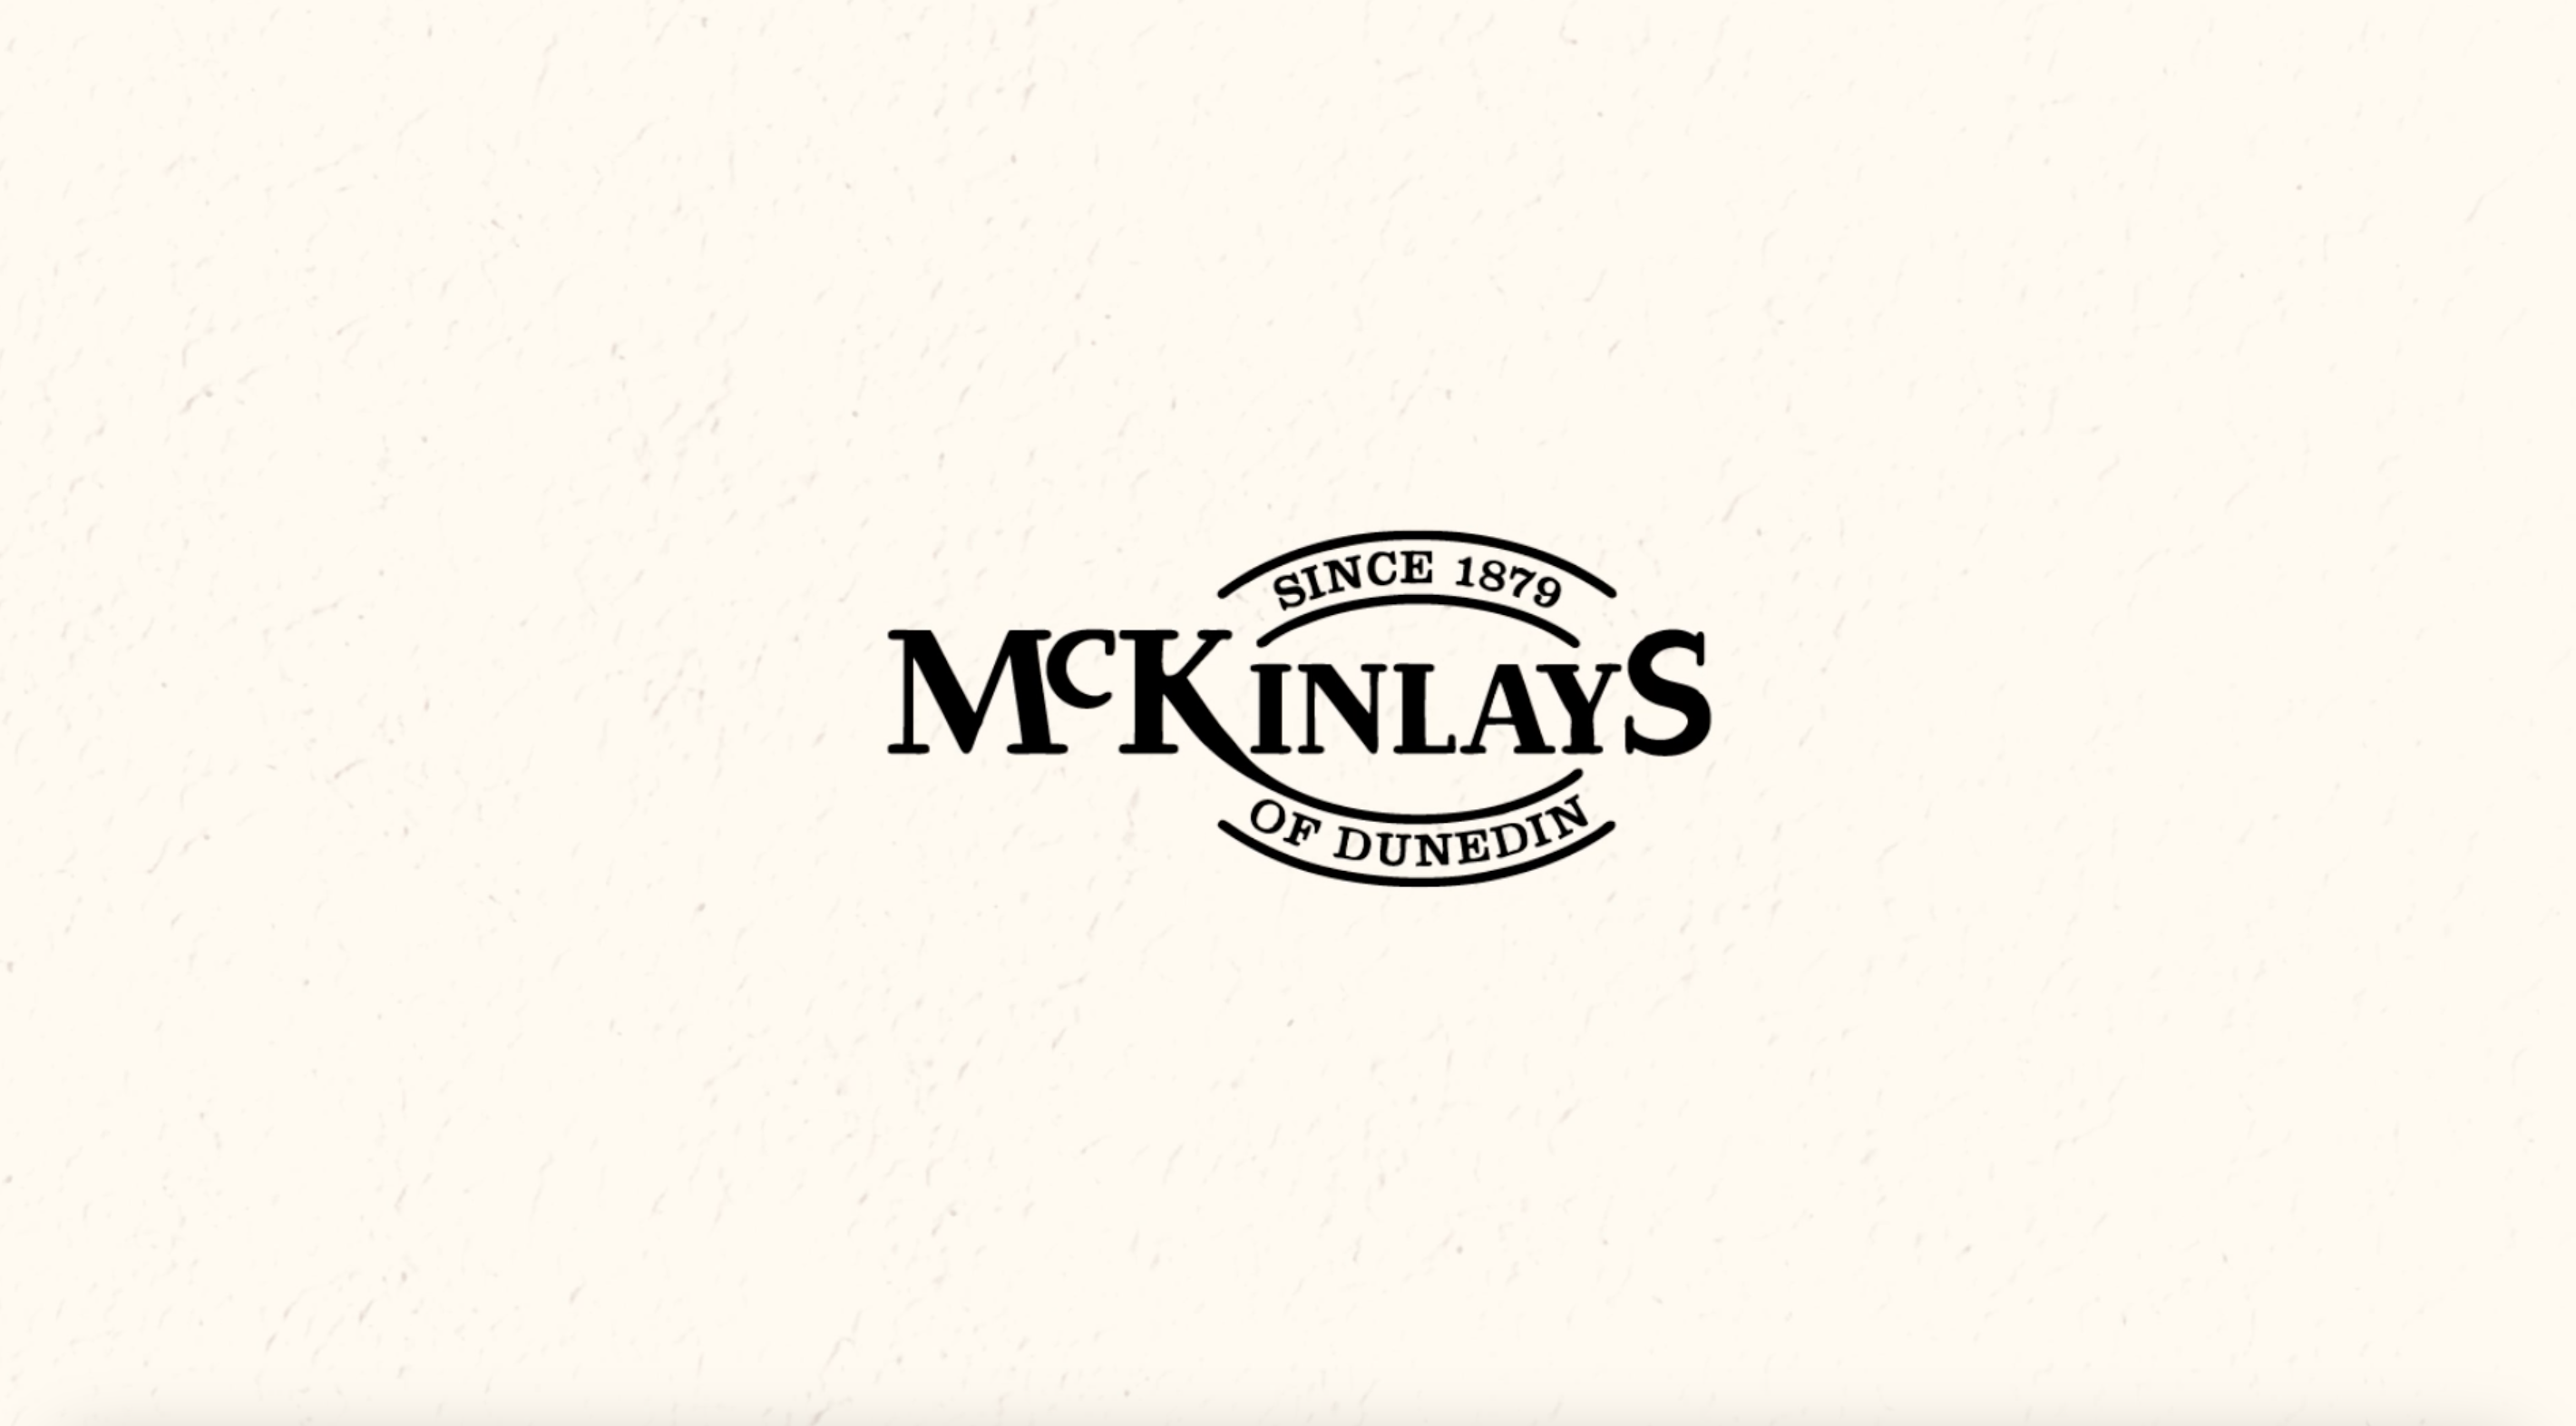 Load video: McKinlays showreel about the footwear business